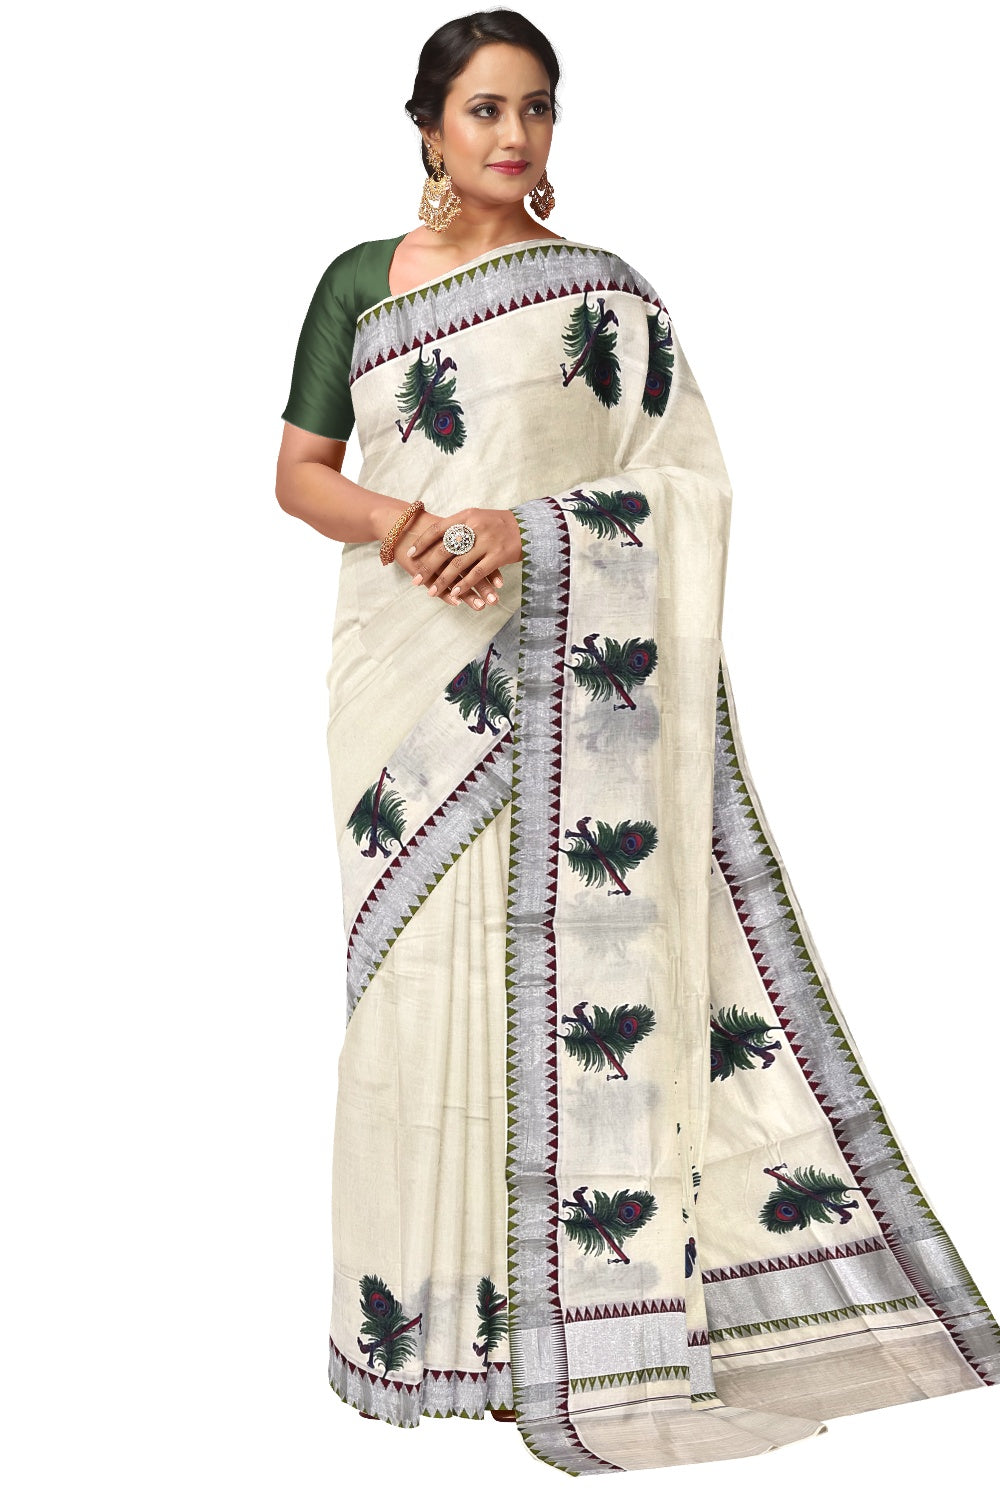 Kerala Pure Cotton Saree with Mural Printed Feather Flute Design and Maroon Light Green Temple Border